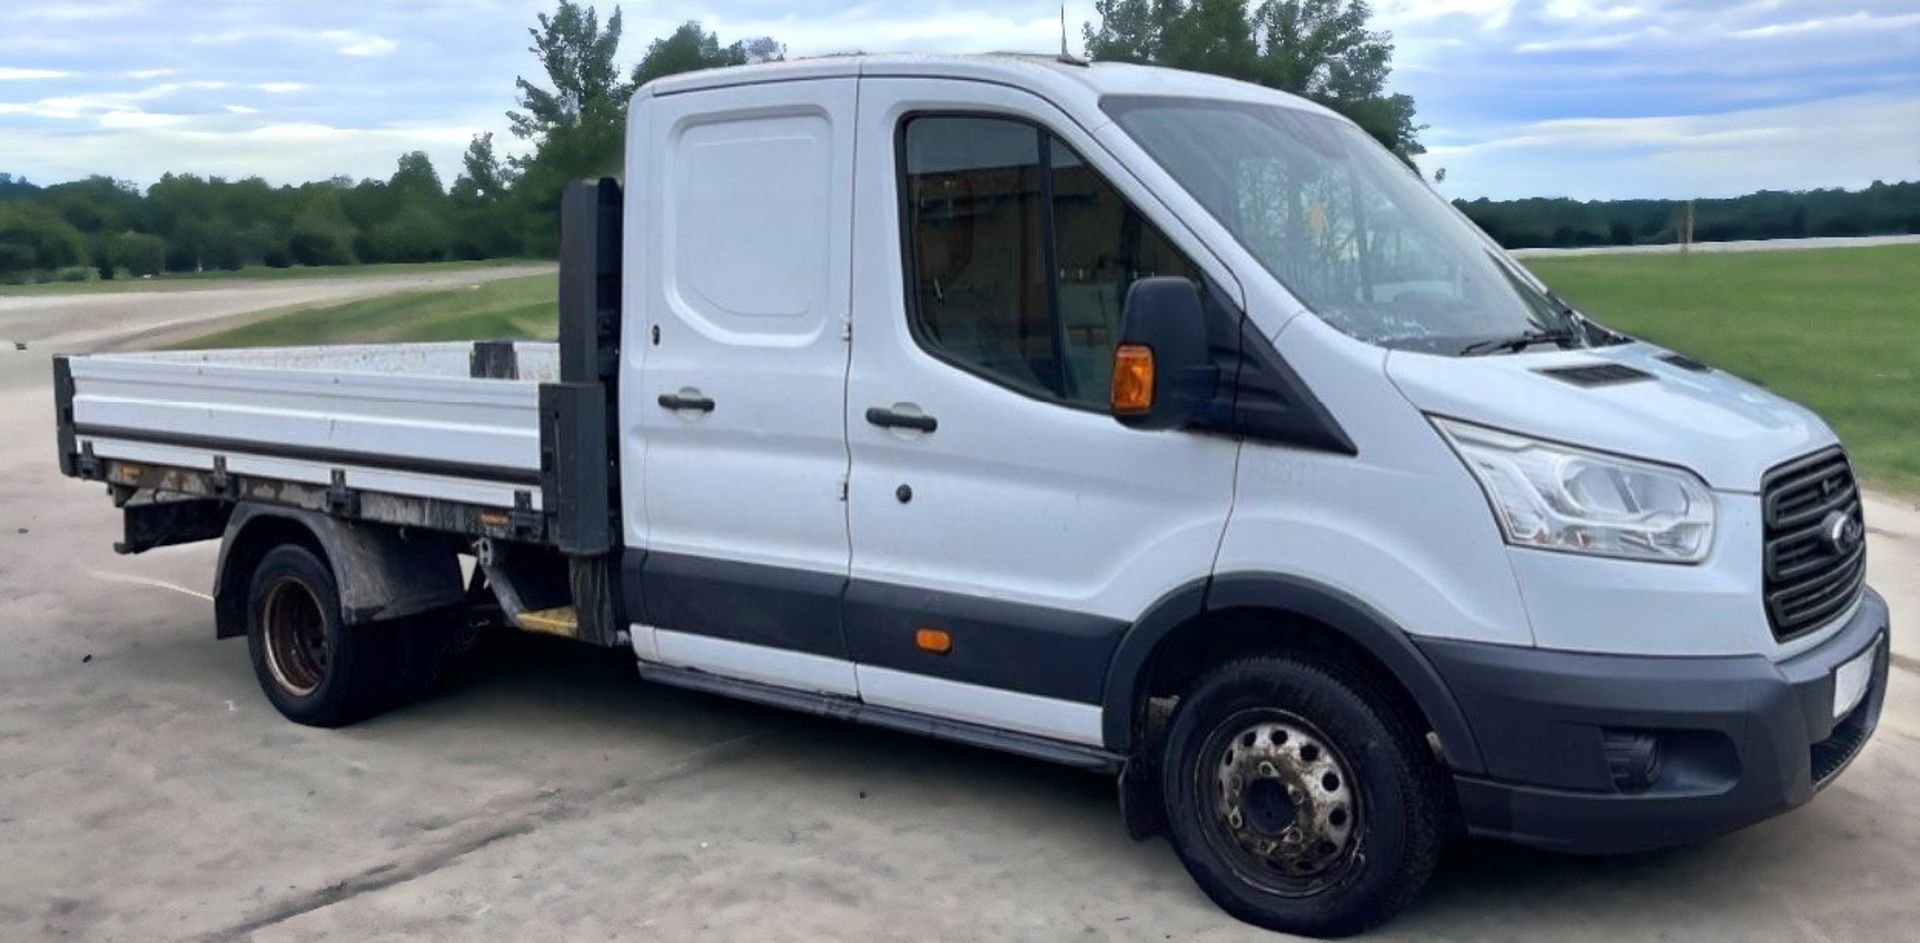 **SPARES OR REPAIRS** 2016 FORD TRANSIT T350 CREWCAB DROPSIDE TRUCK - LOW MILEAGE, HIGH POTENTIAL - Image 2 of 8